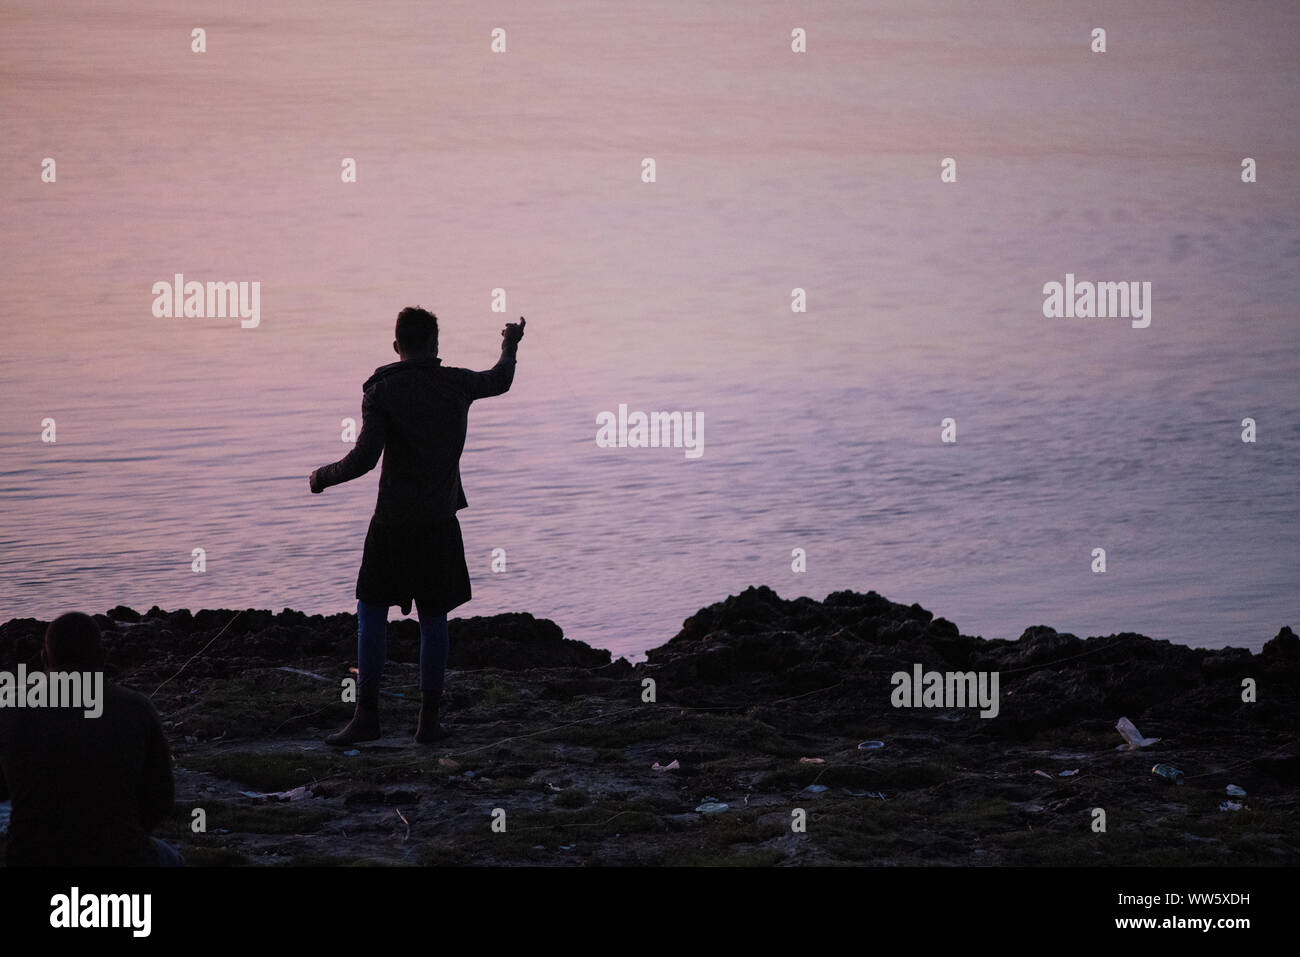 A man fishing from the shore, the water reflecting violet before sunrise, Playa Larga, Stock Photo